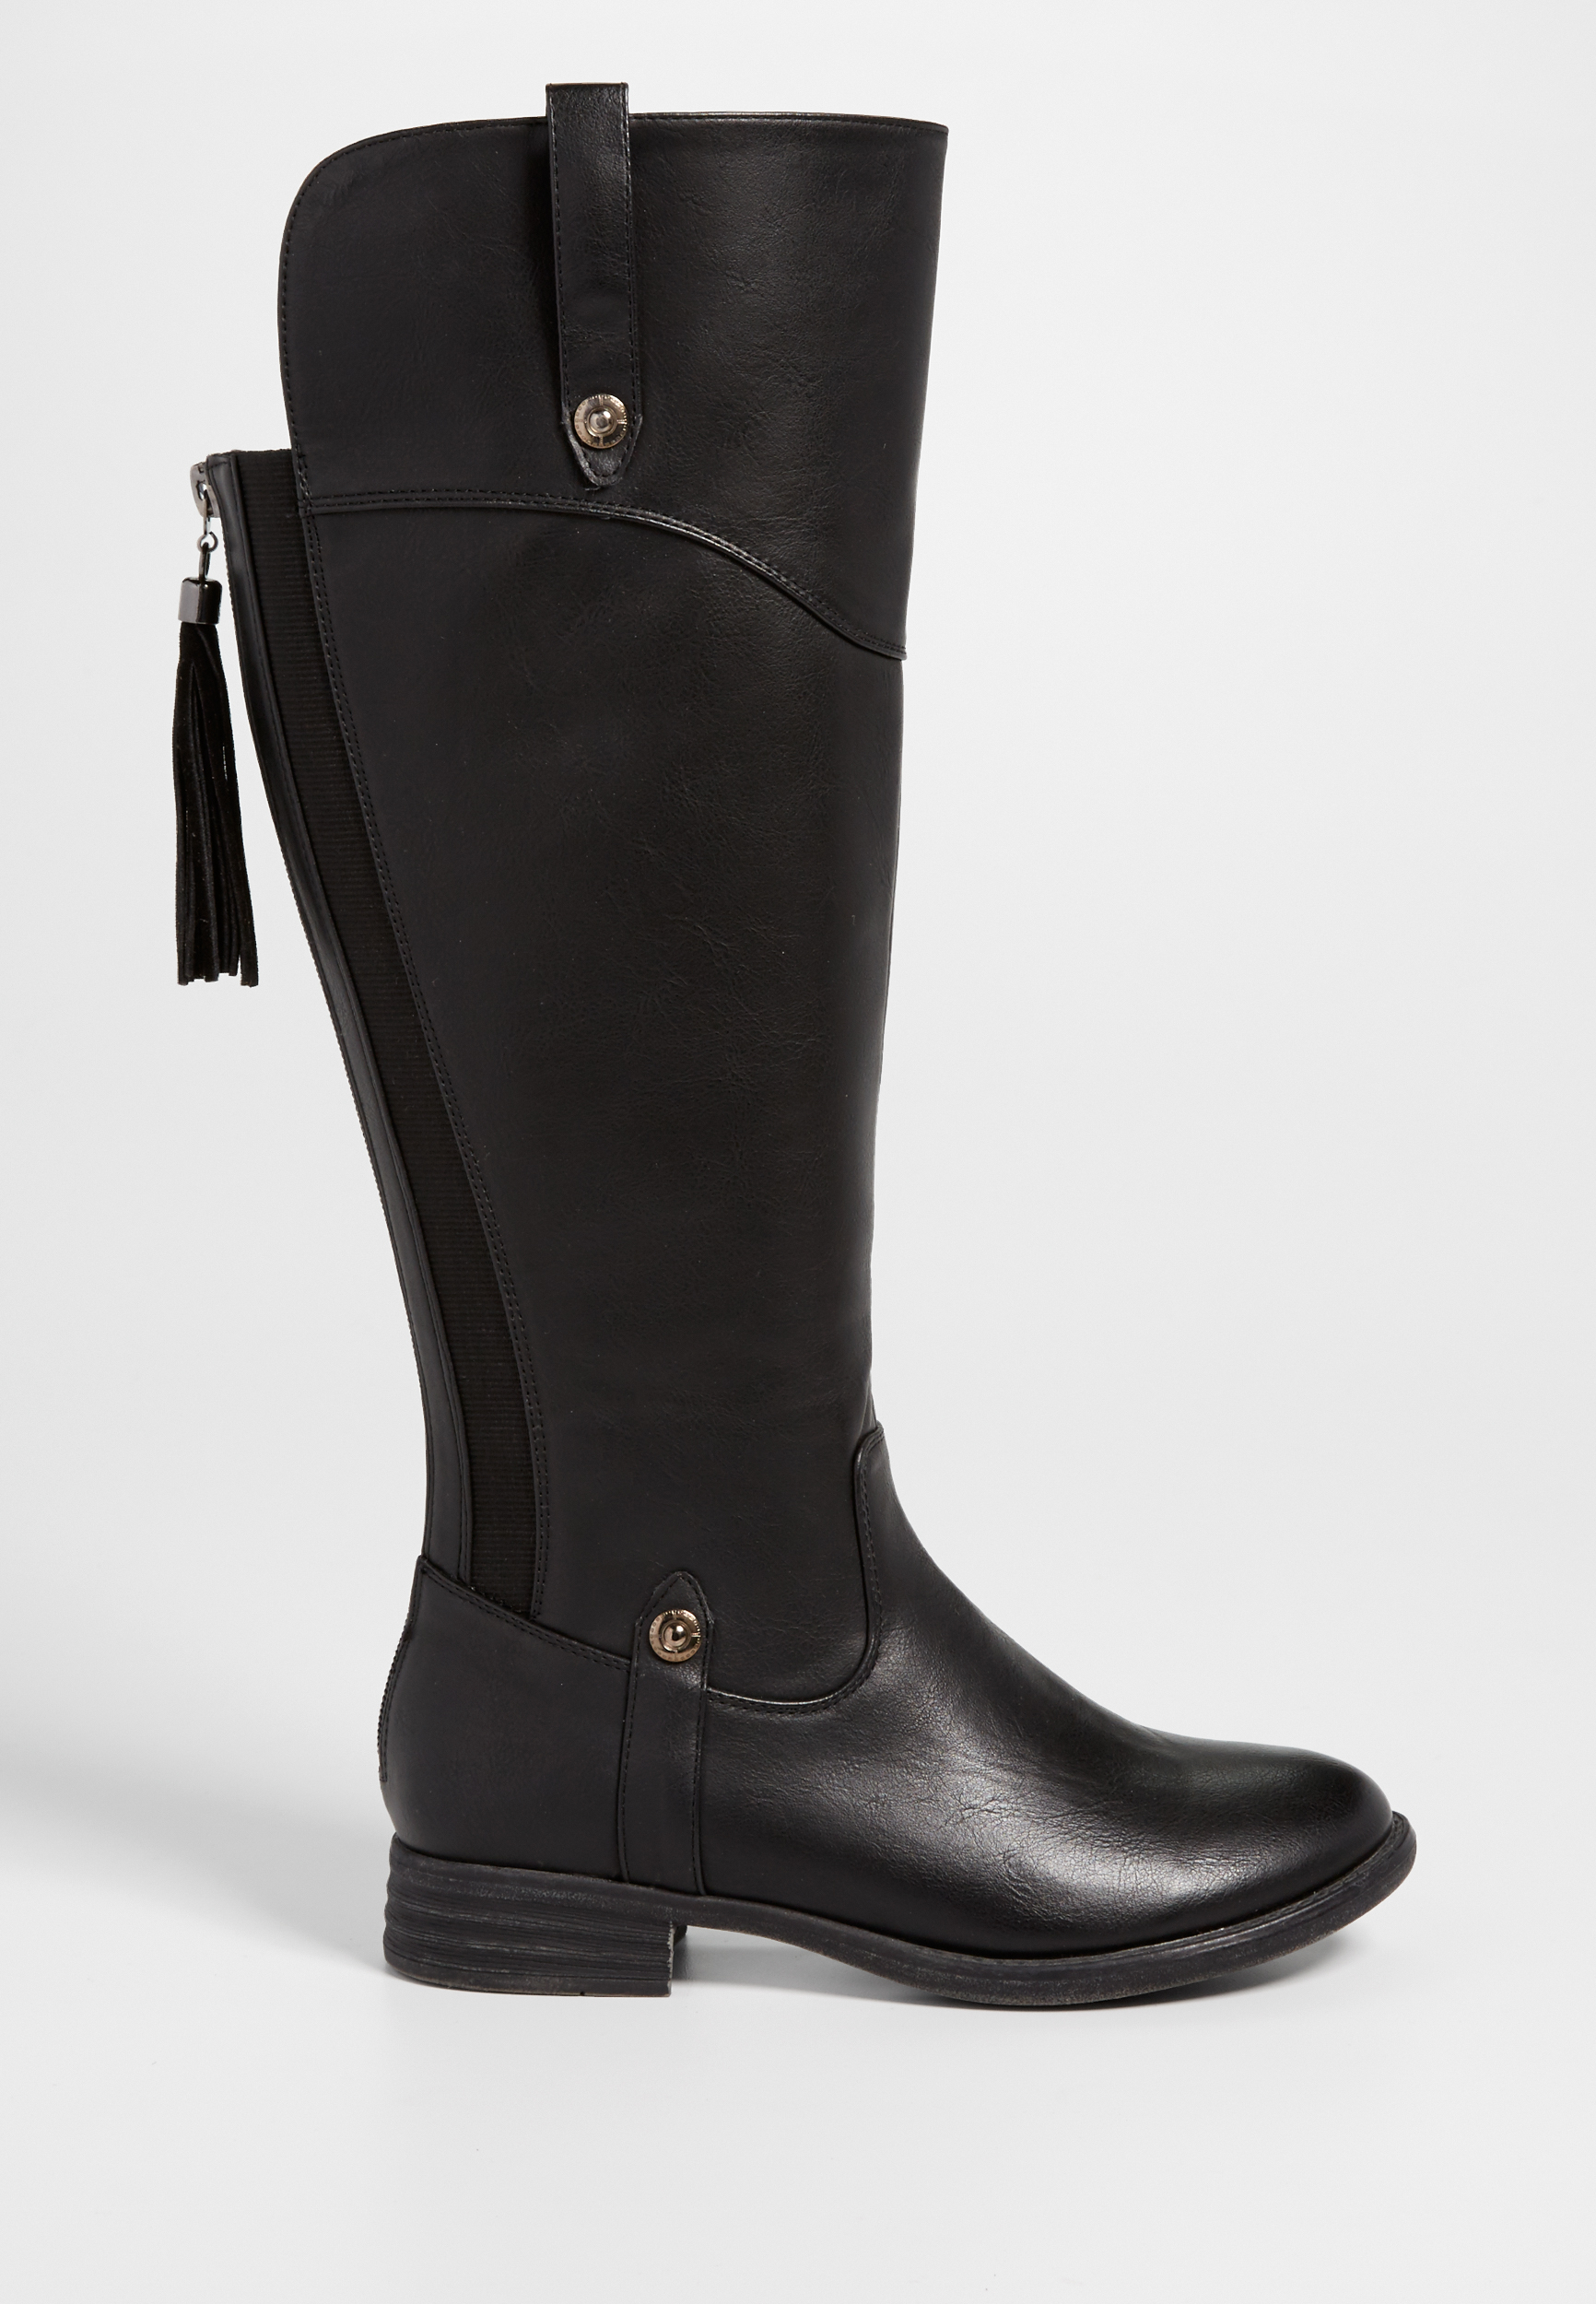 Sierra boot with gore and tassel in black | maurices